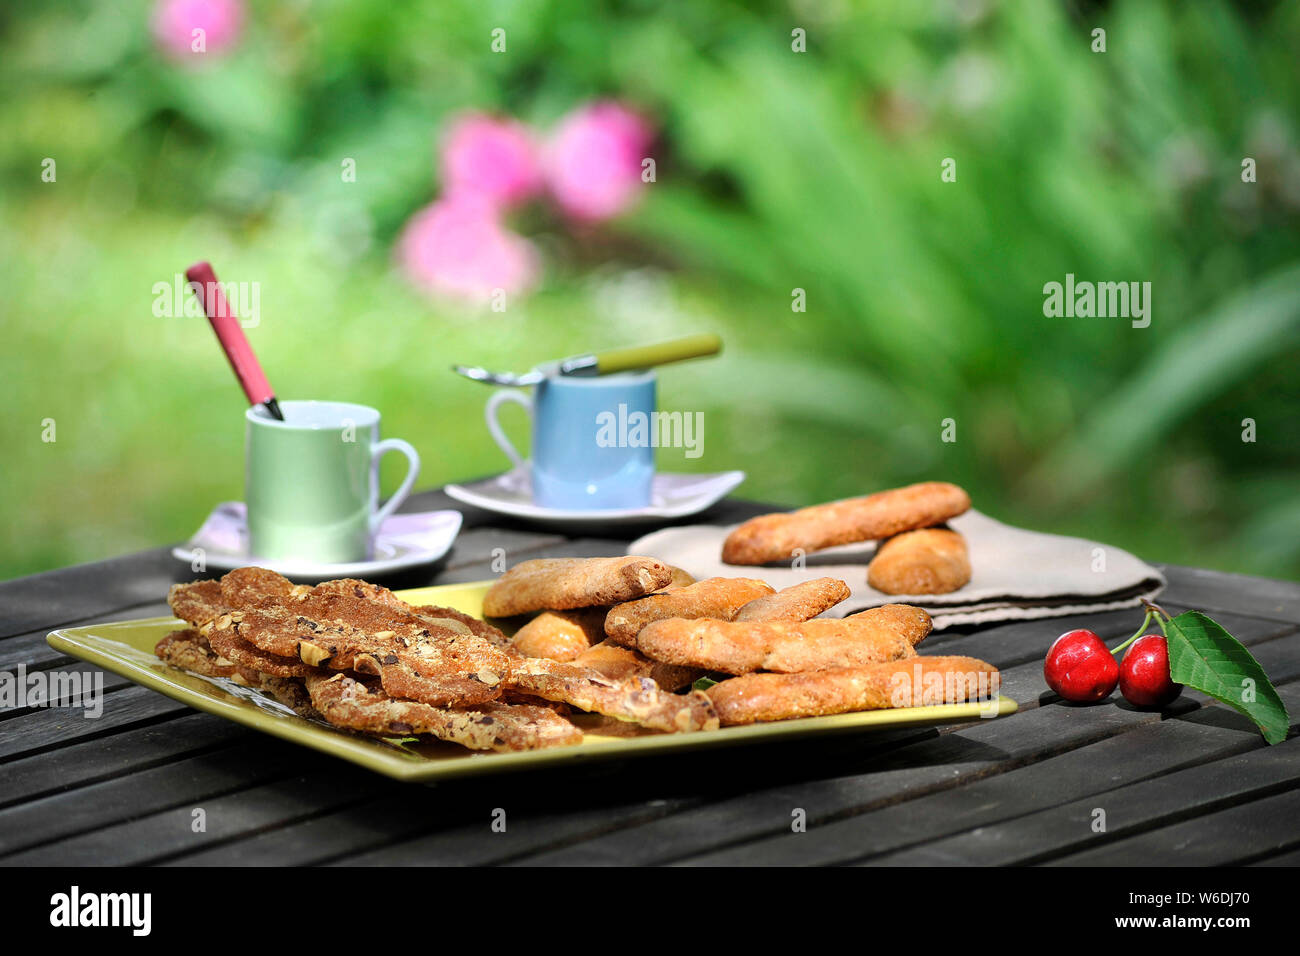 Table with biscuits, cups of coffee and cherries. Culinary specialties from the Berry area: almond “croquets” biscuits from Berry and coffee, in a gar Stock Photo